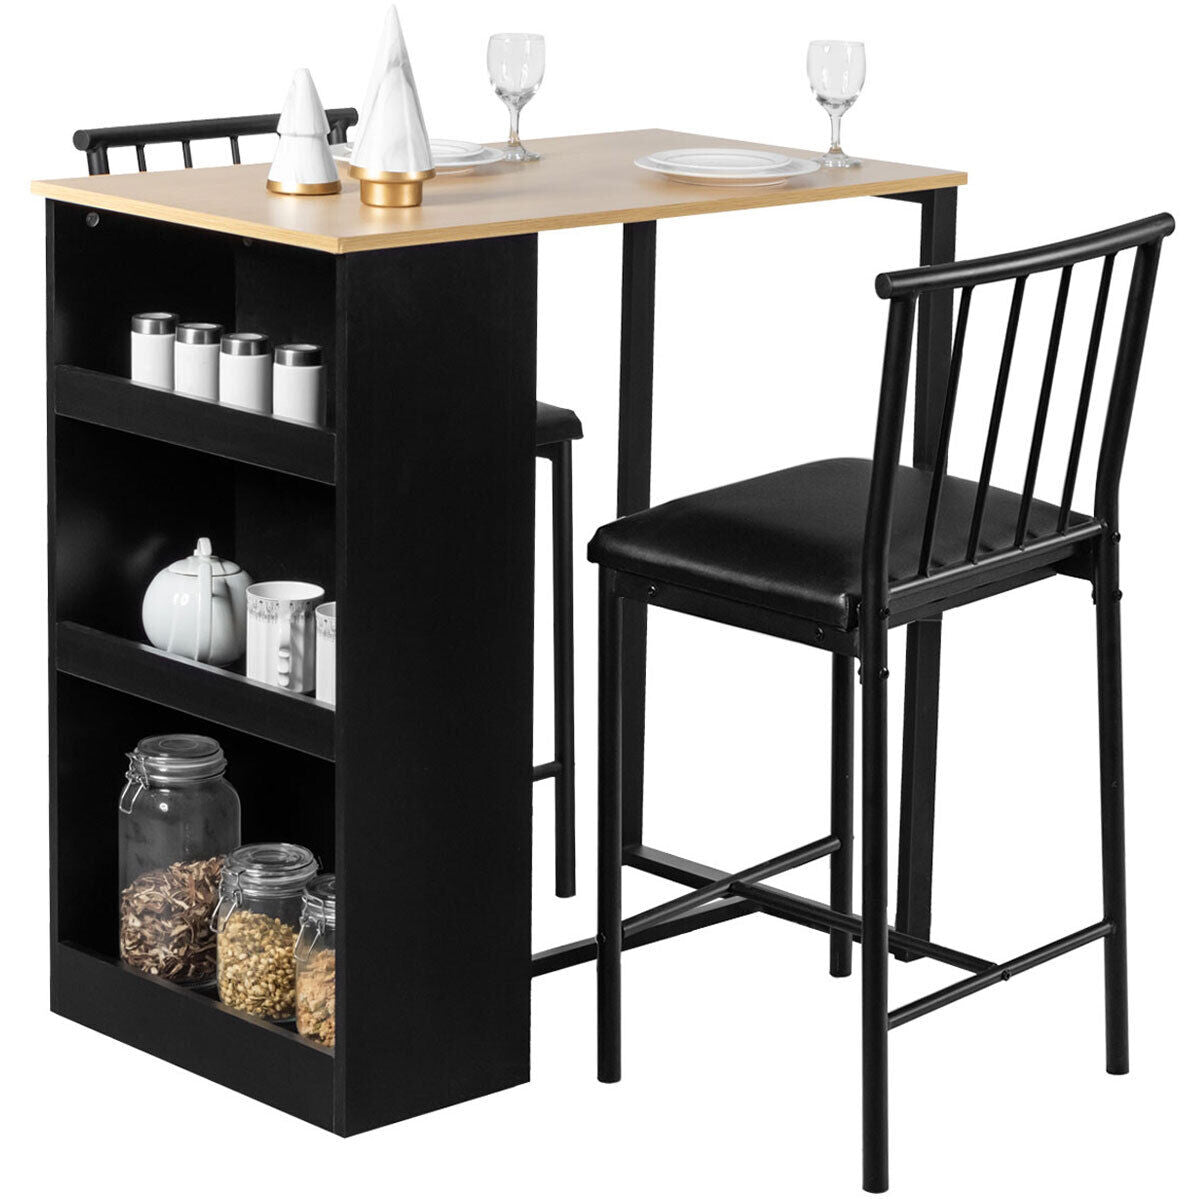 3 Piece Counter Height Pub Dining Set Kitchen Table & Chairs w/ Storage Natural